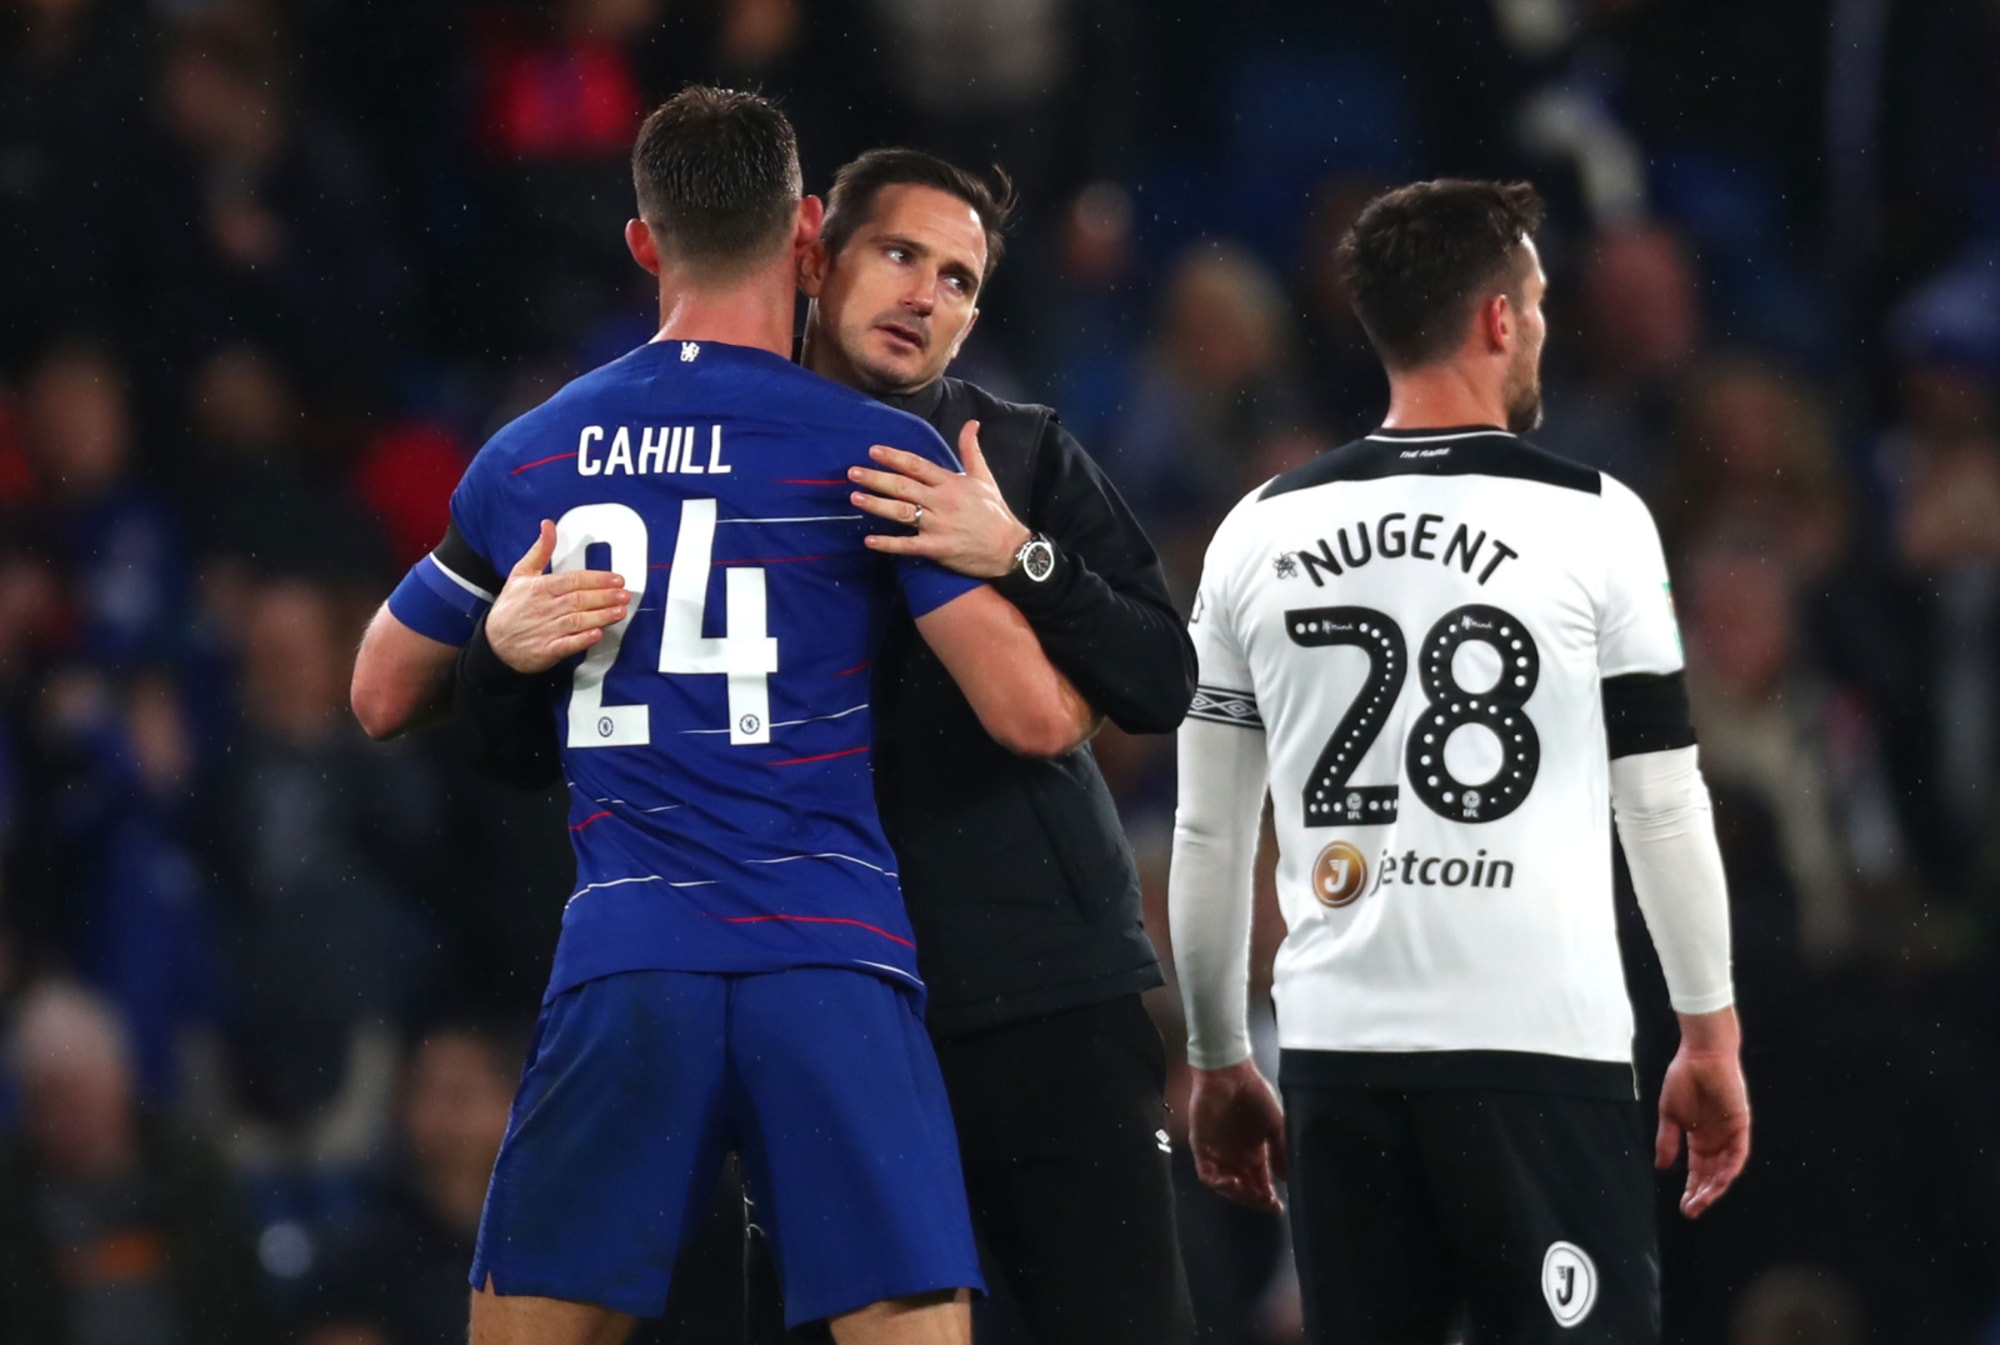 Chelsea: Frank Lampard's midfield tactics exploited Blues he knows best